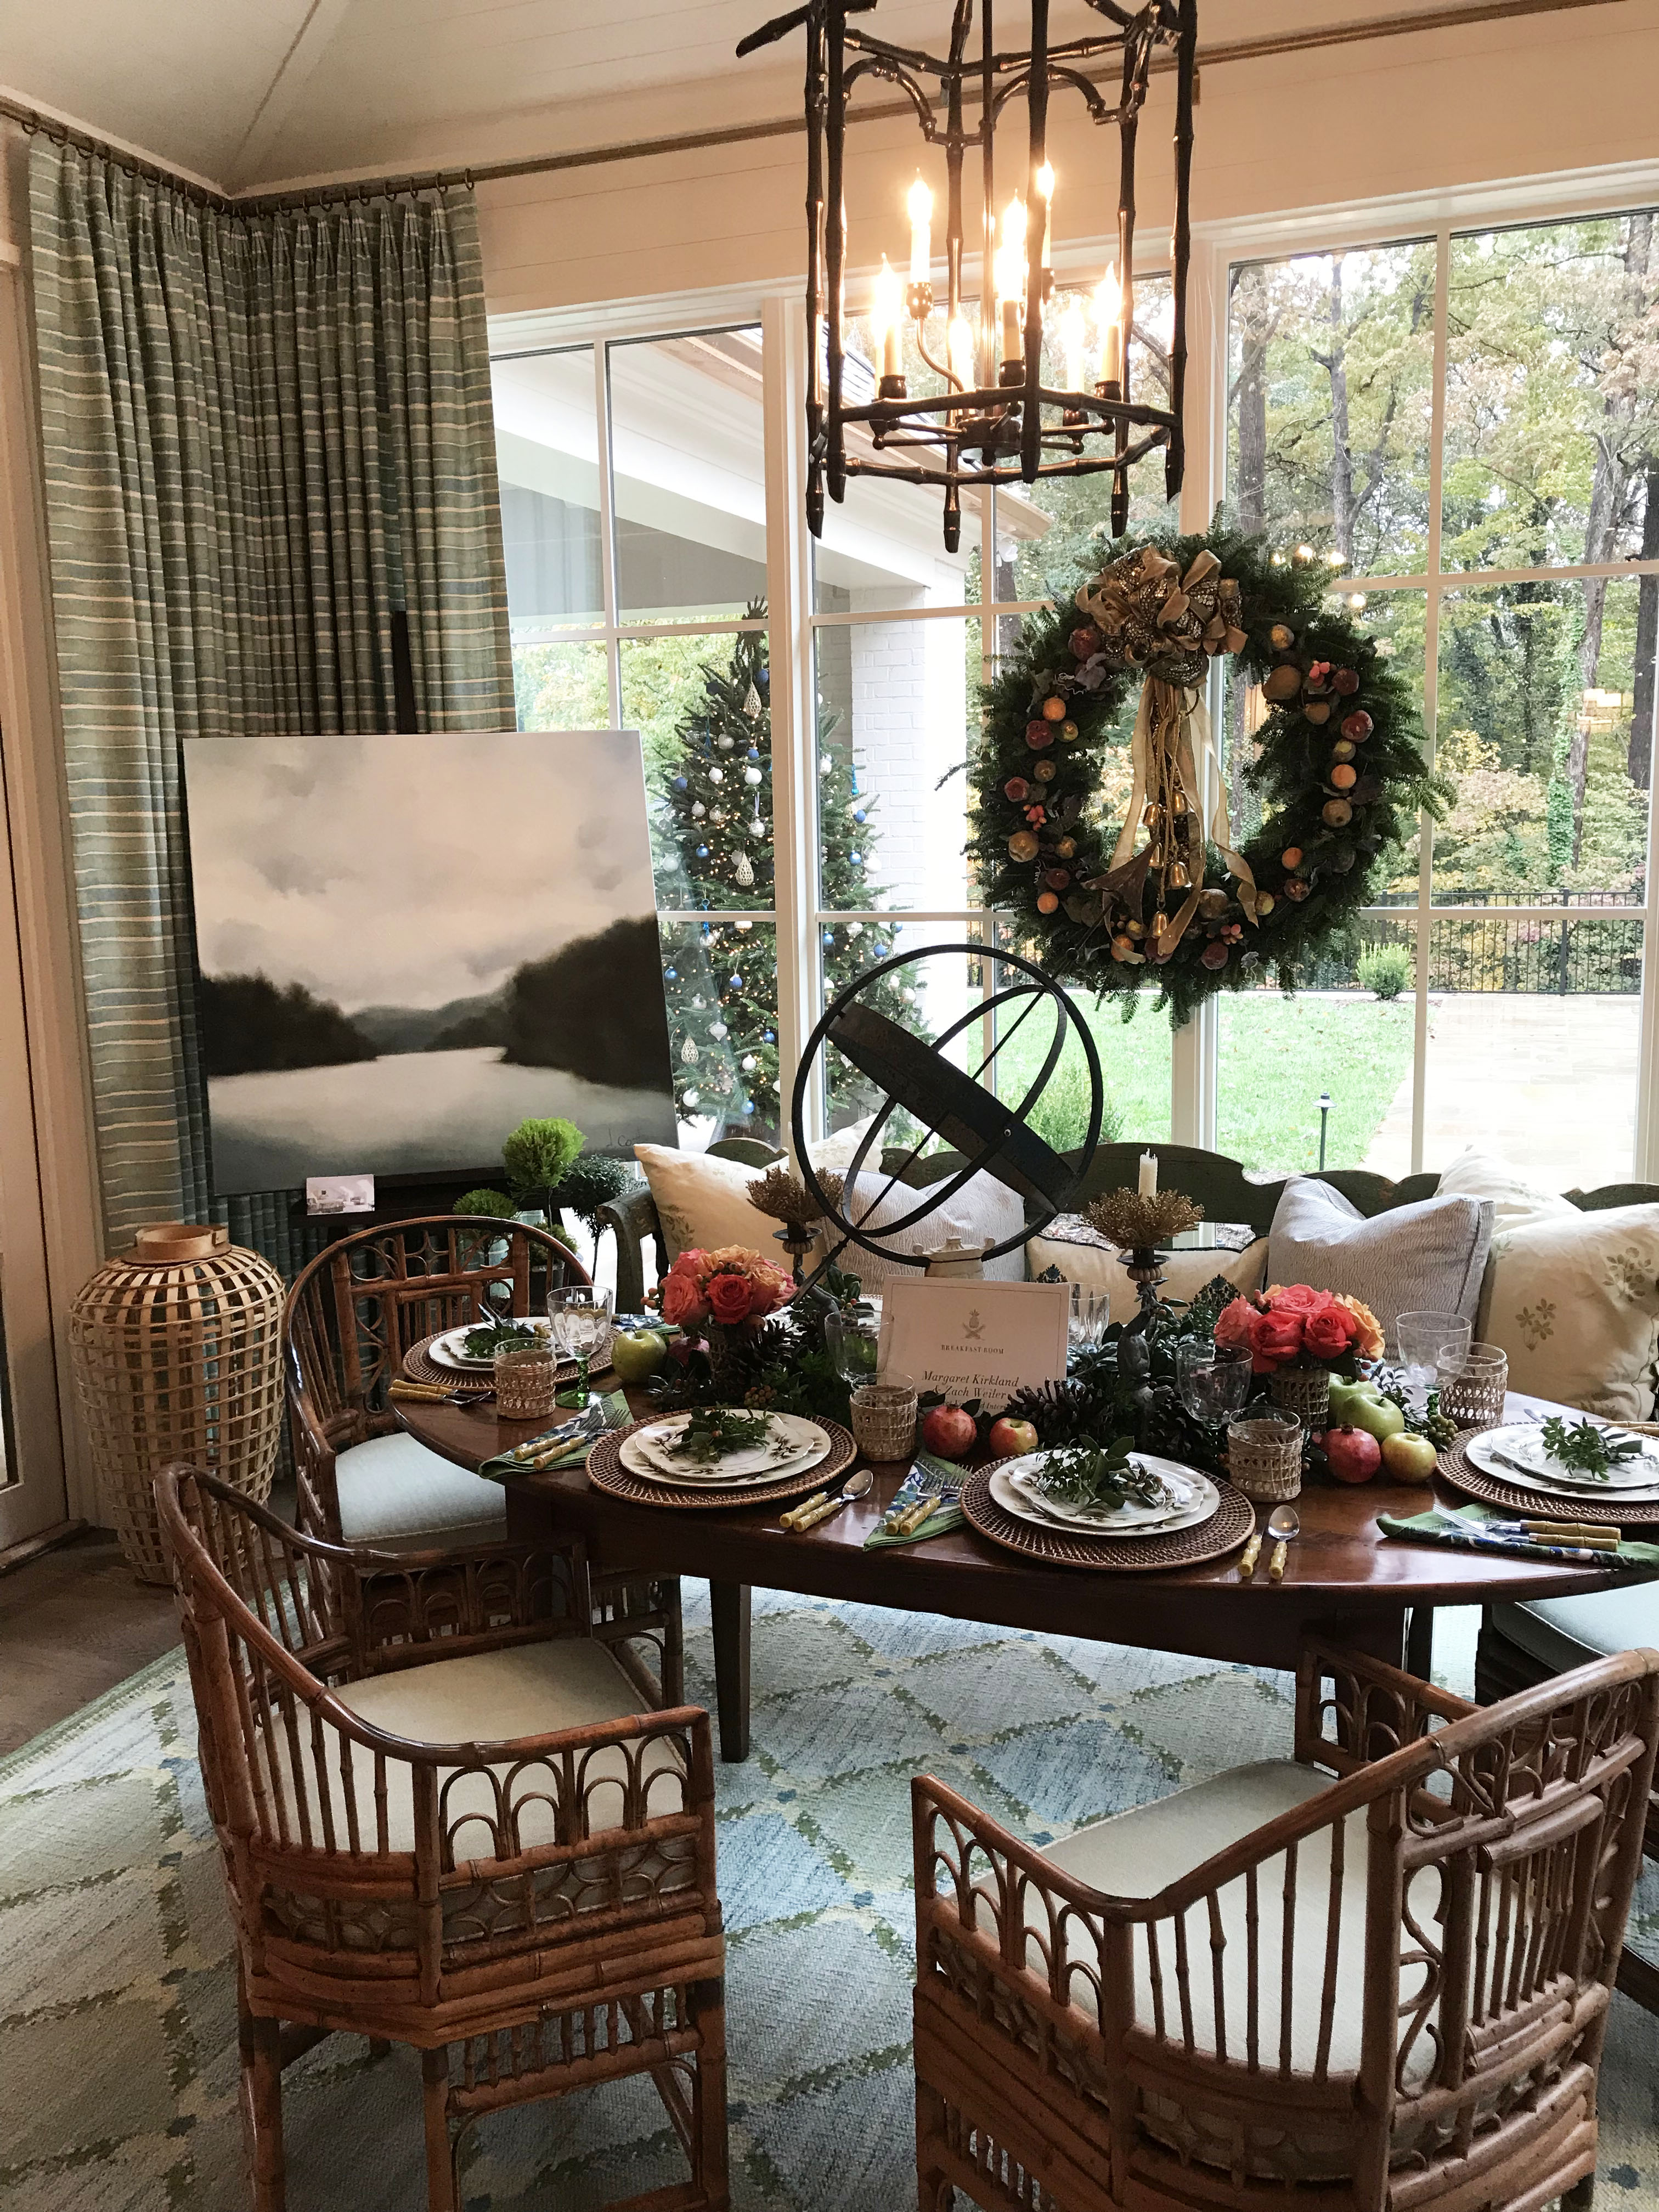 Breakfast room design by Margaret Kirkland at the Home for the Holidays Designer Showhouse on stuffymuffy.com.